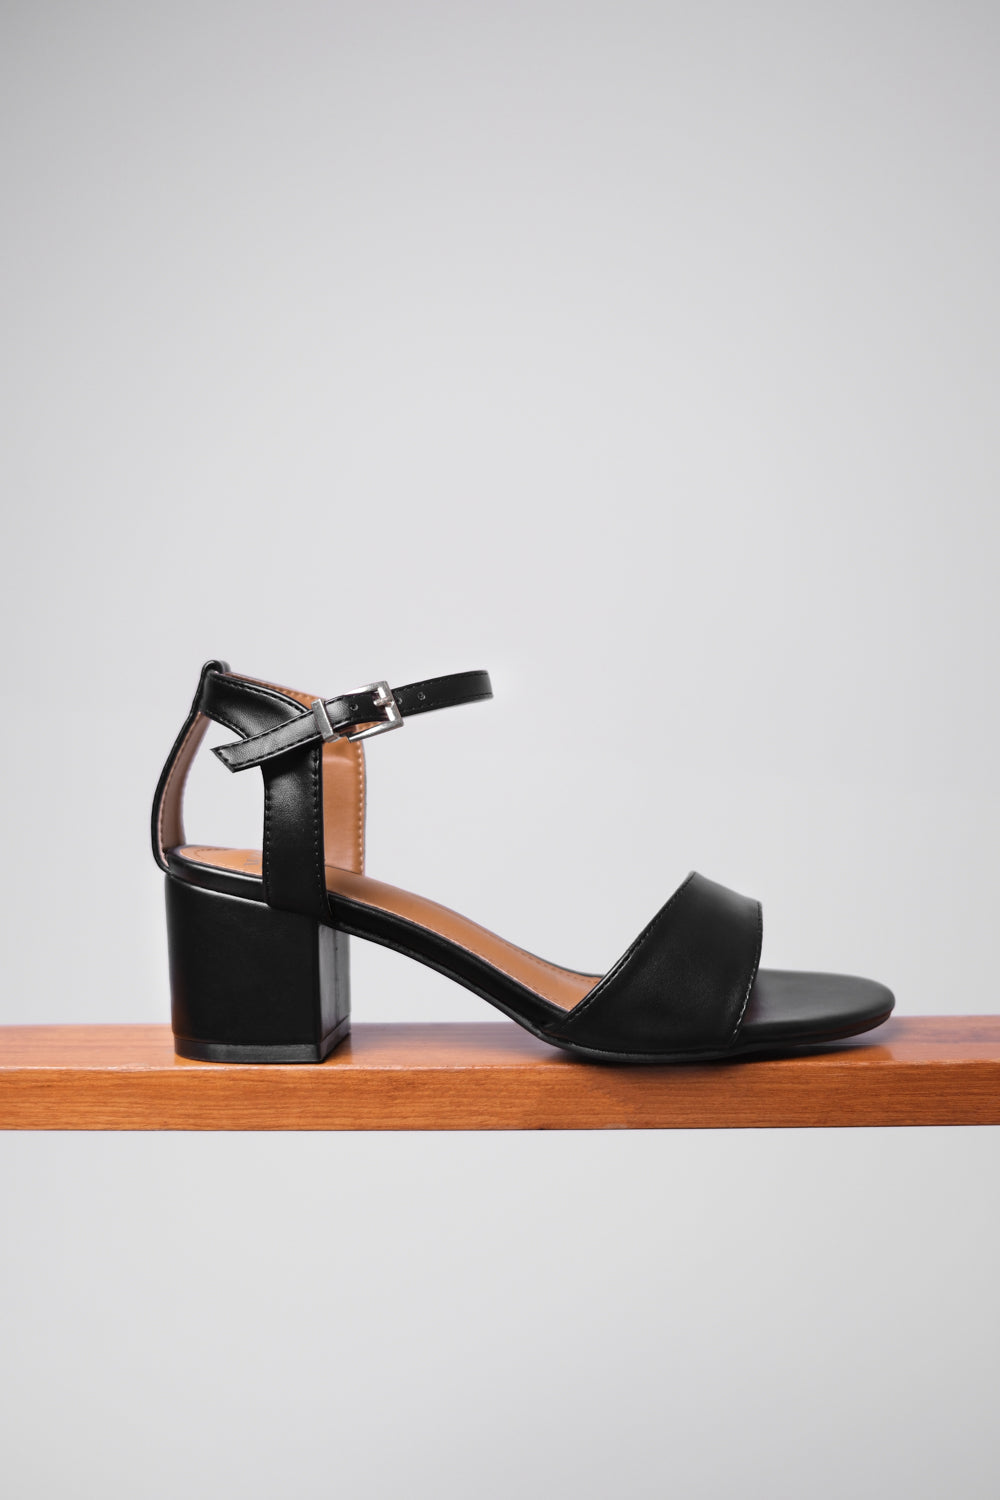 ADRIANNA STRAPPY MID HIGH BLOCK HEELS OPEN TOE IN BLACK FAUX LEATHER